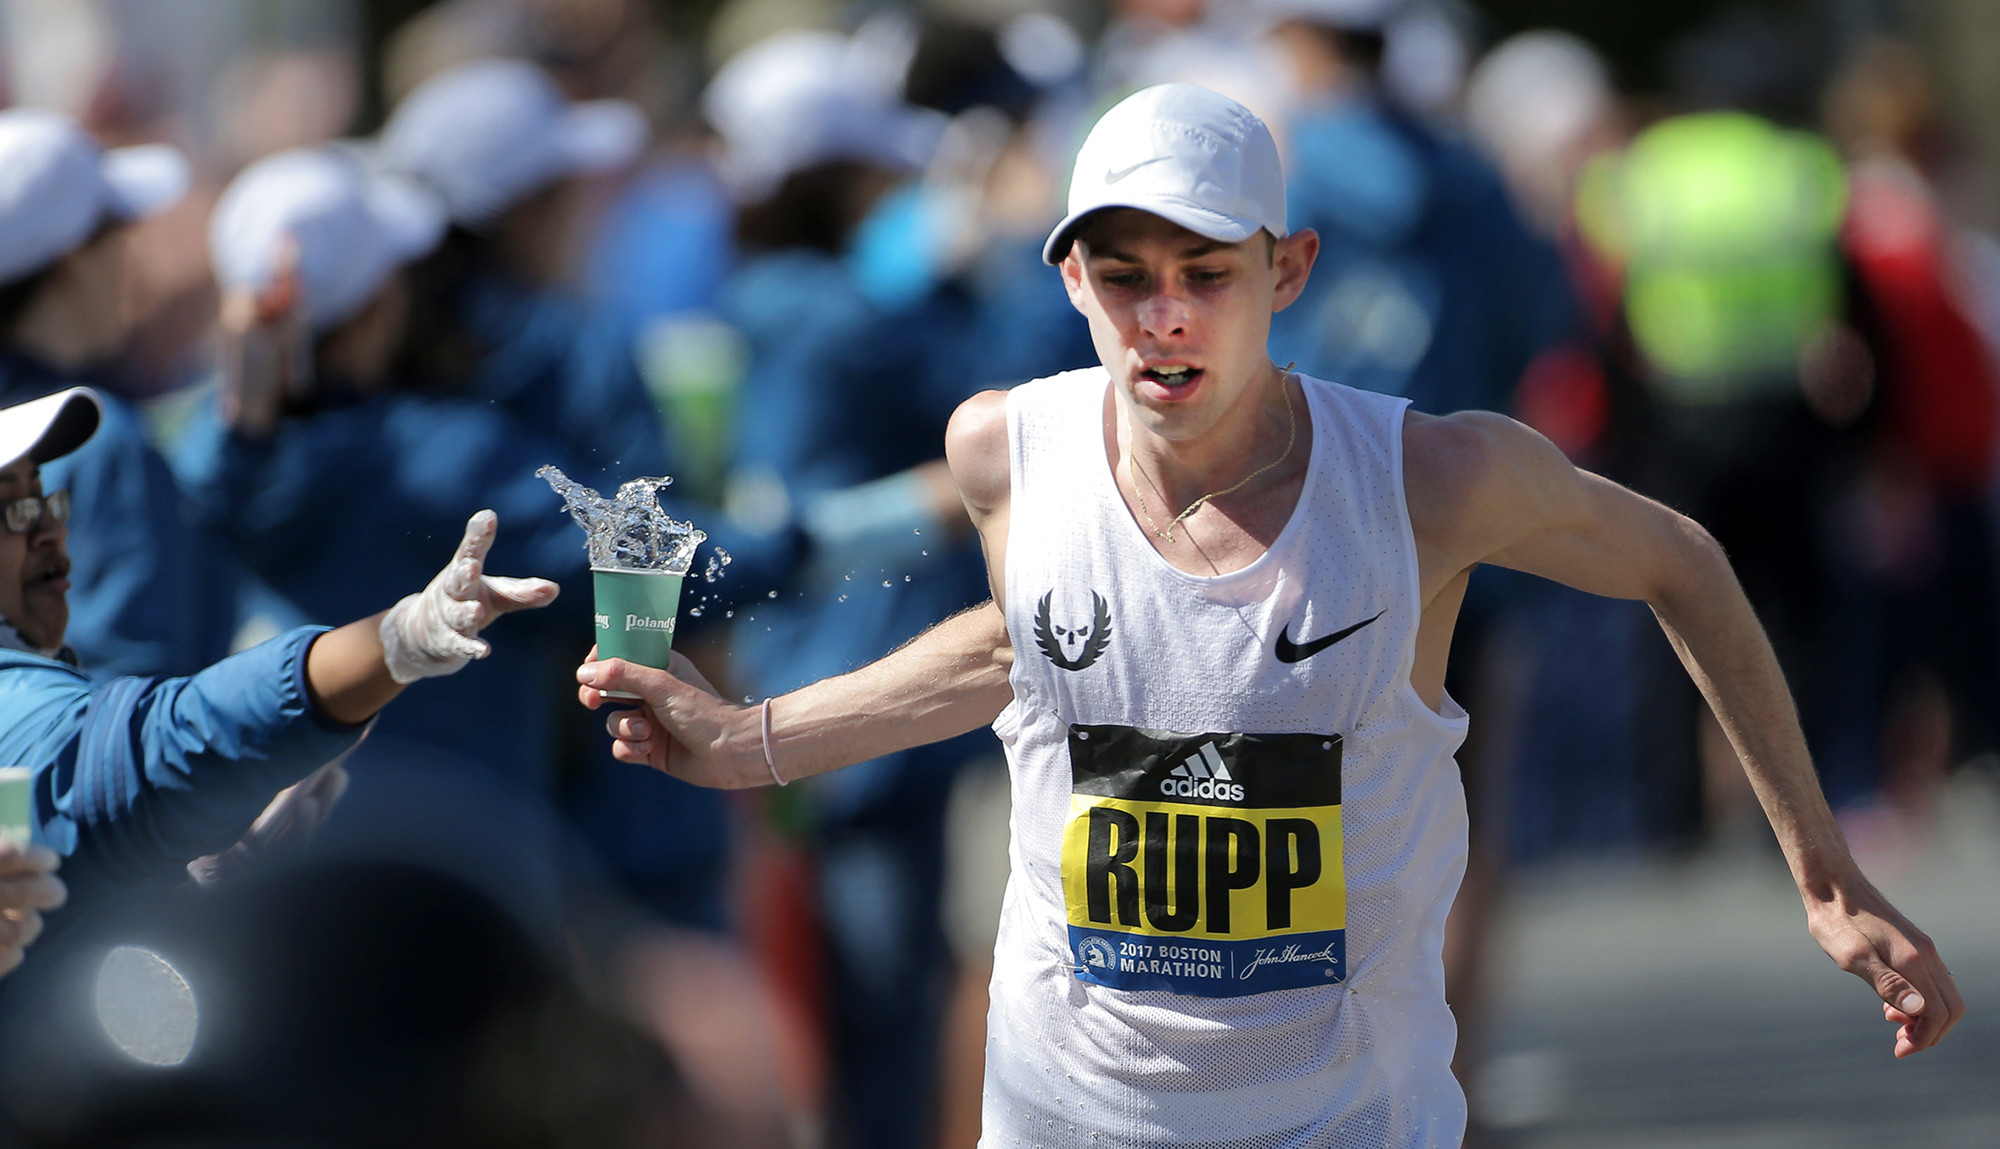 Galen Rupp is going to be racing half marathon on Sunday in Italy